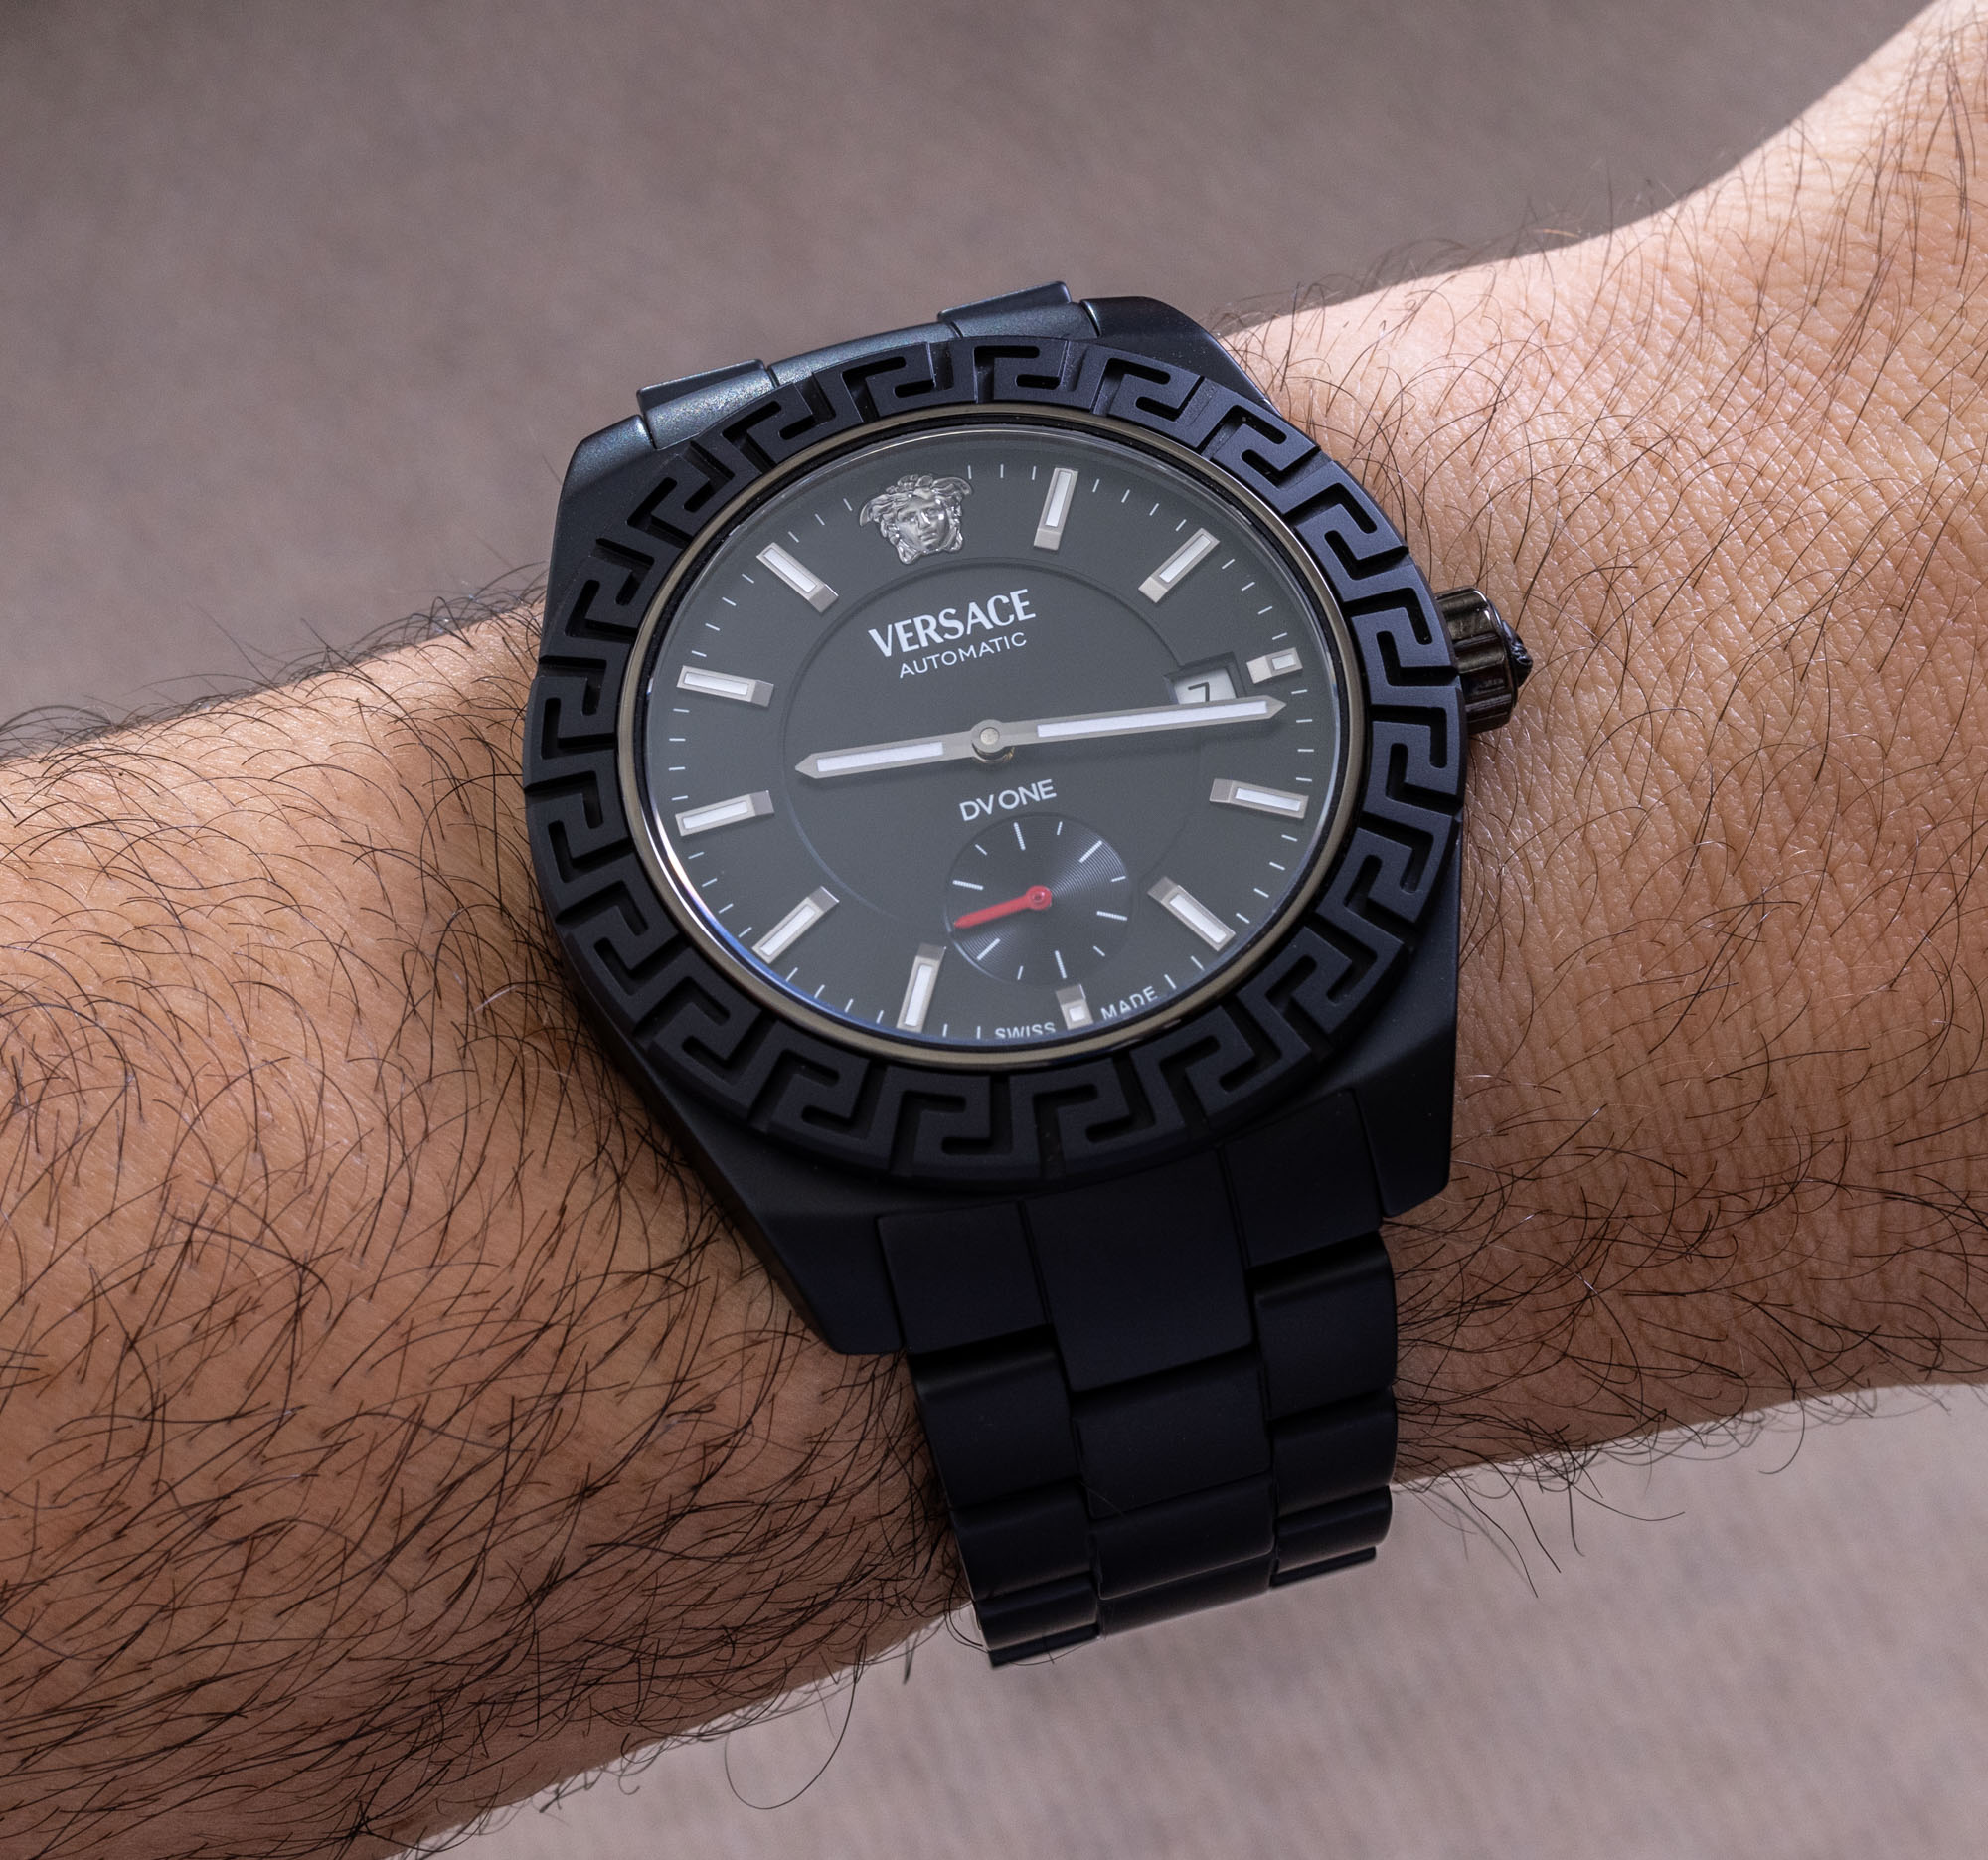 Watch Review: The Ceramic Men's Versace DV ONE Automatic